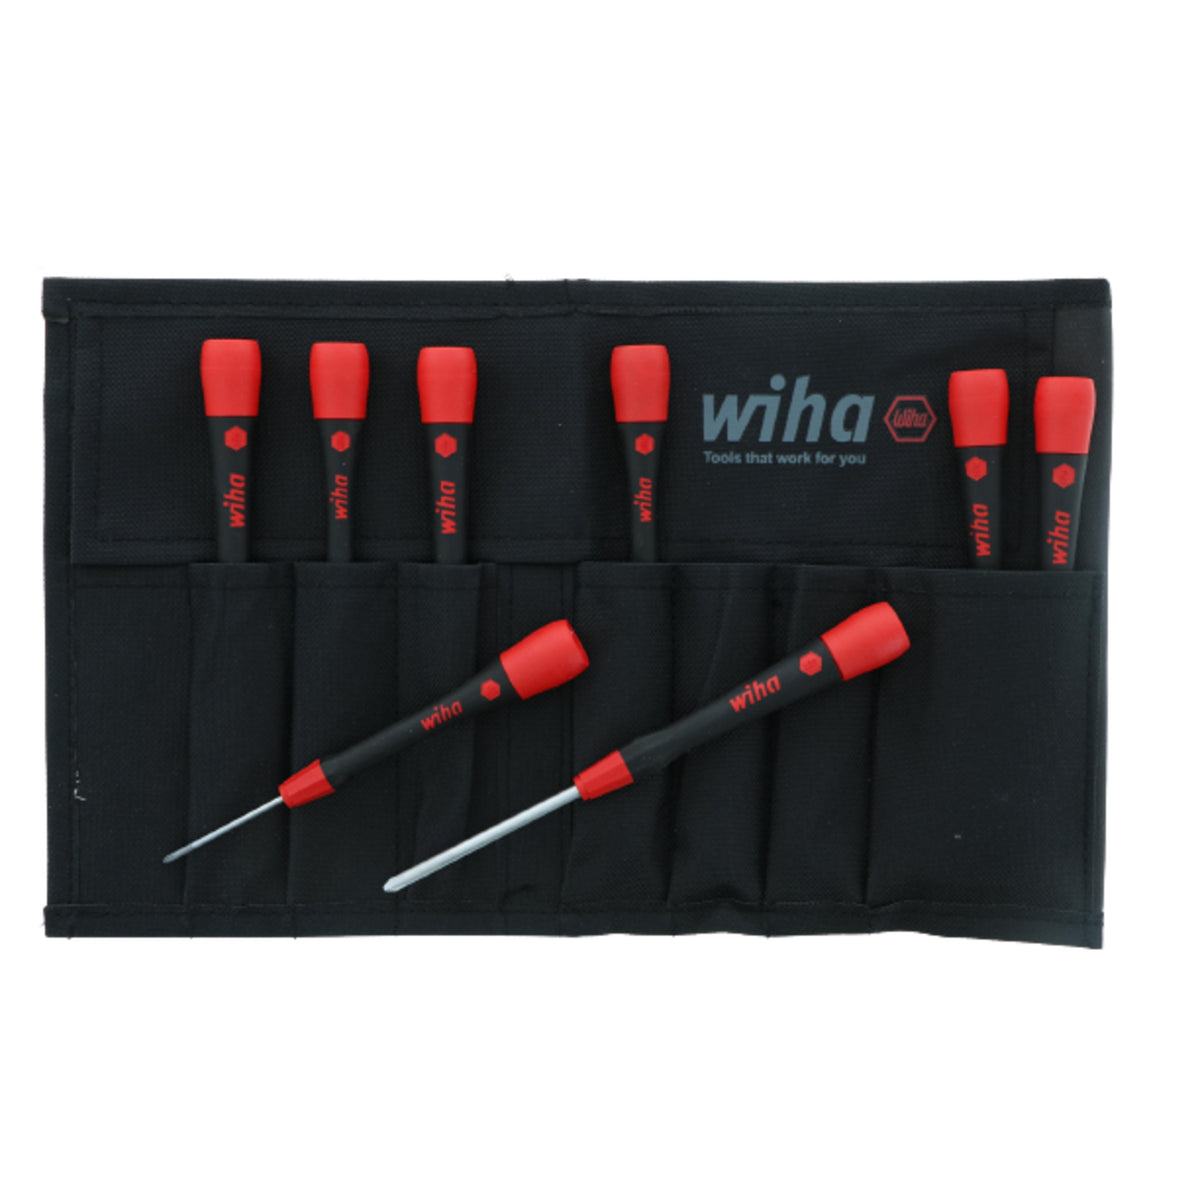 Wiha 26193 8 Piece PicoFinish Precision Slotted and Phillips Screwdriver Set